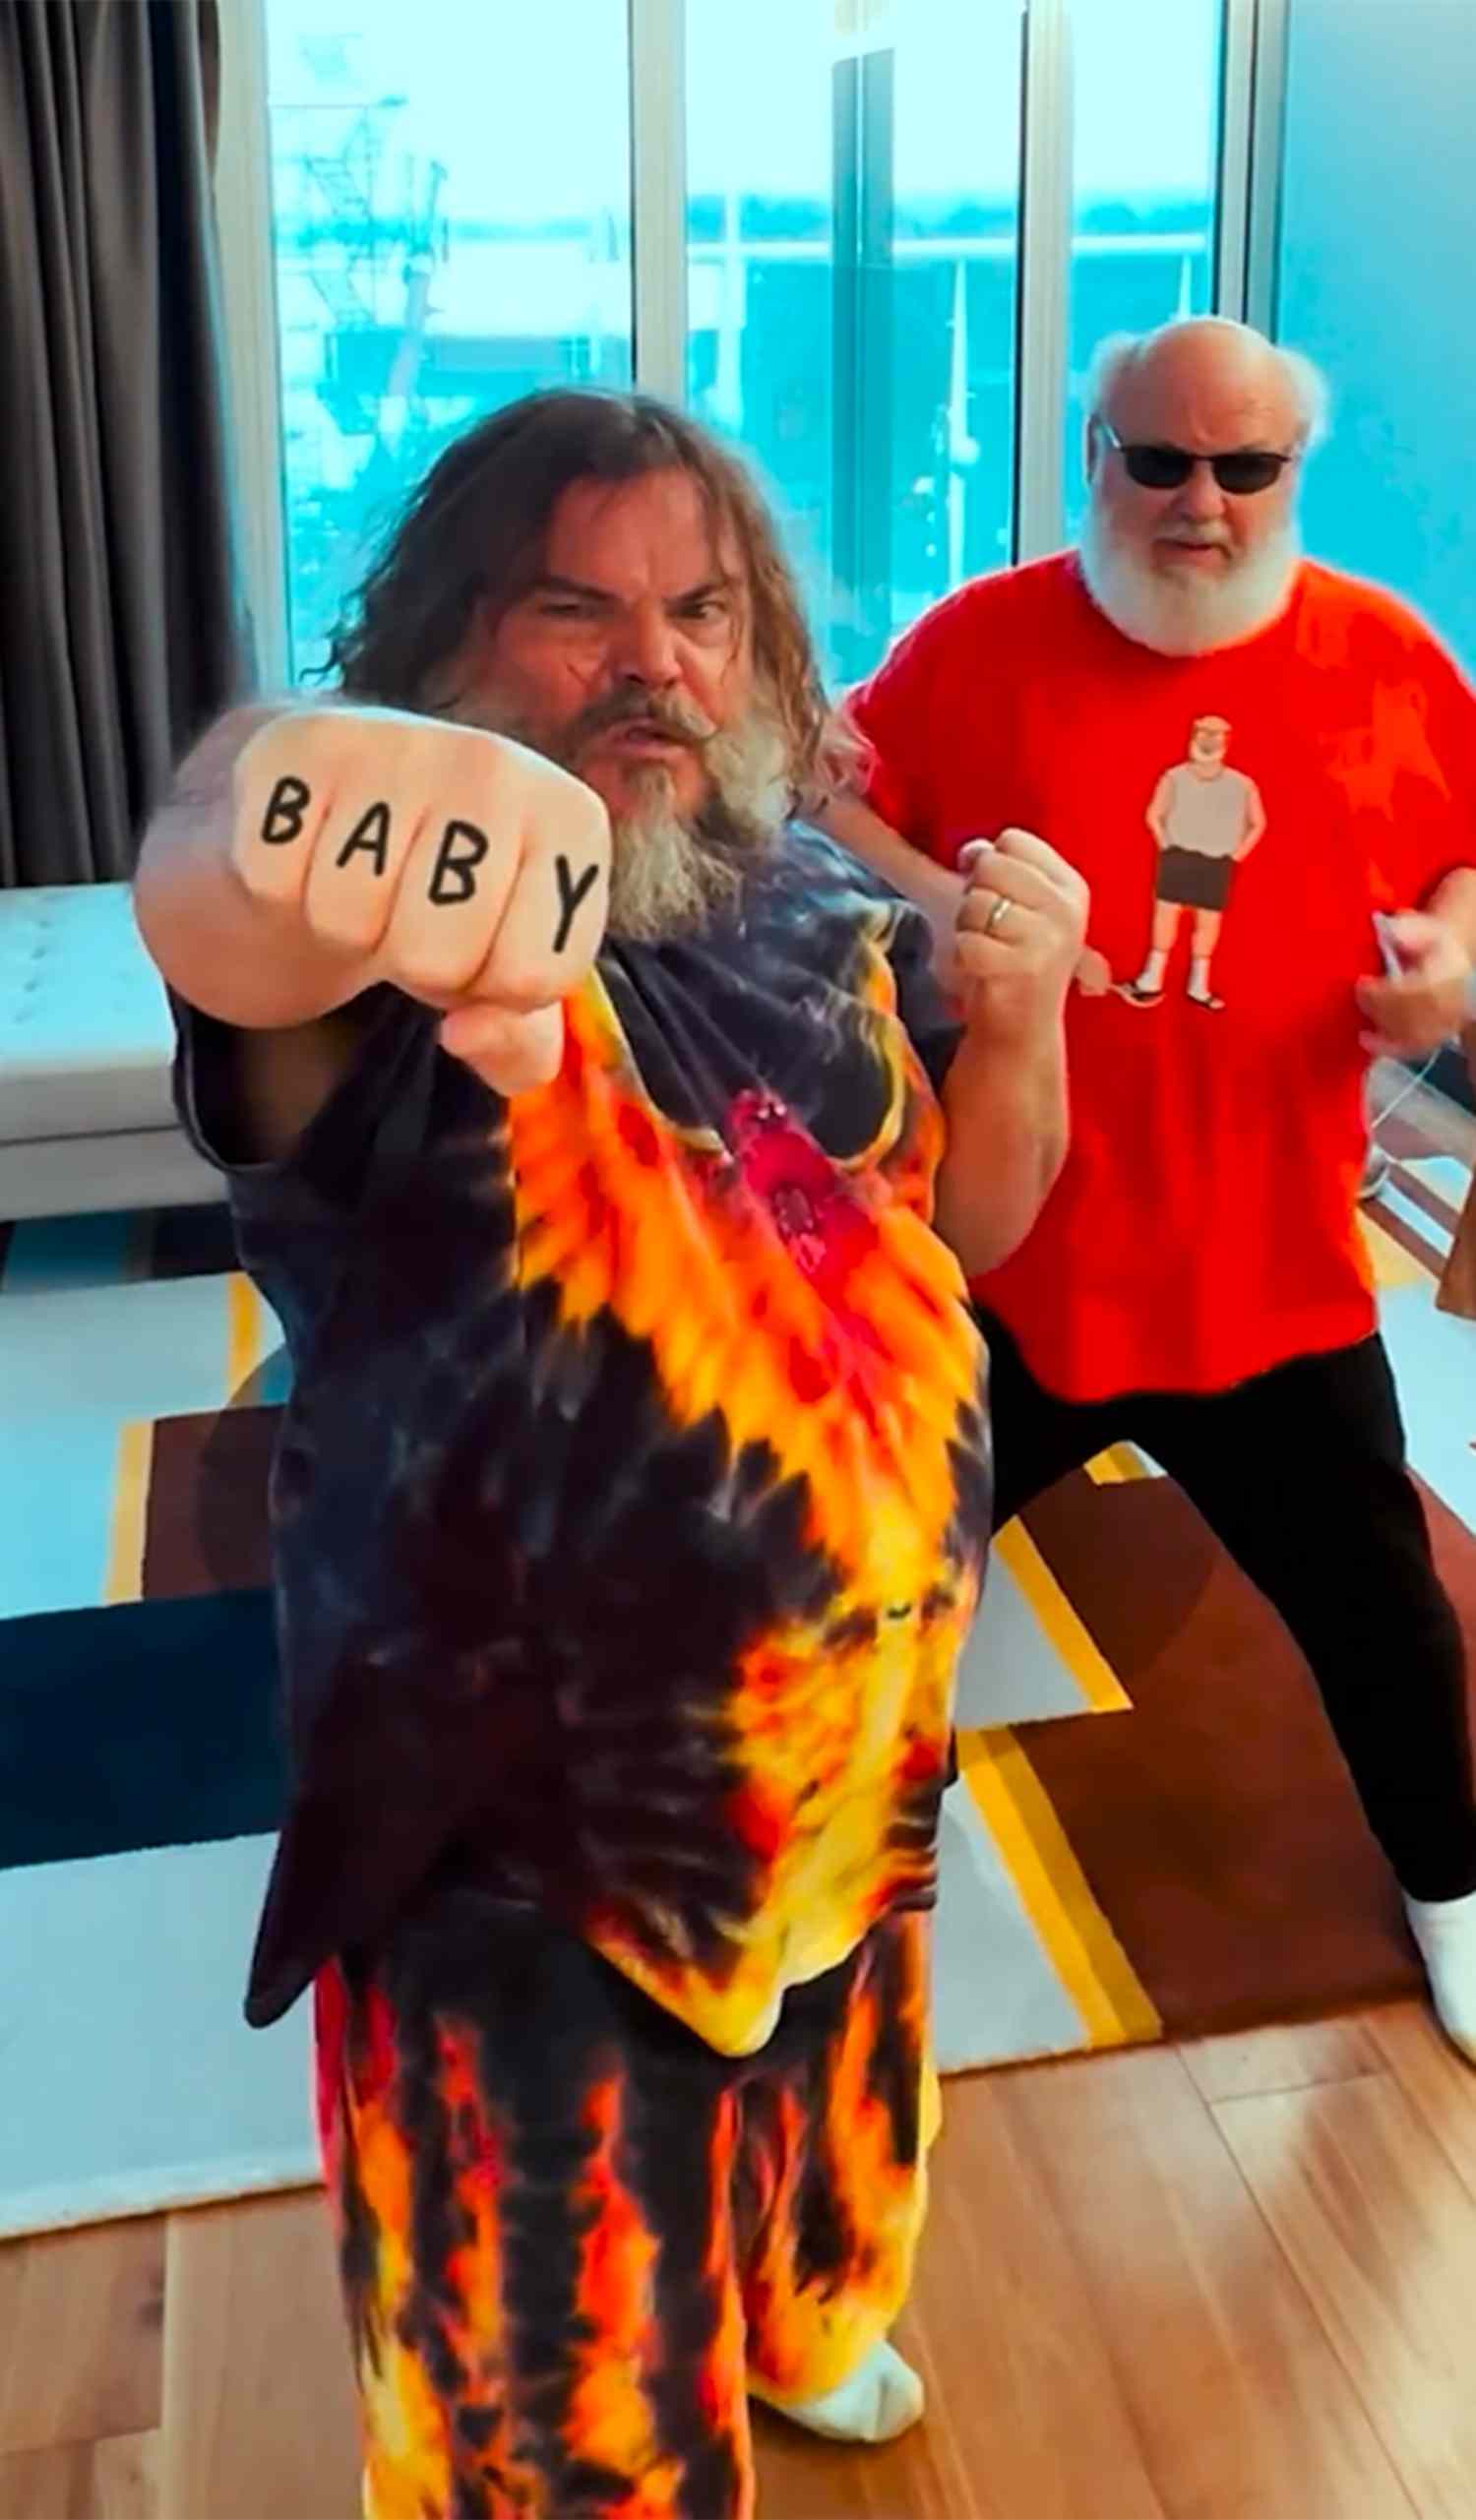 See Jack Black and Bandmate Give Britney Spears' Hit 'Baby One More Time' a Hard Rock Spin: 'Tenacious B!